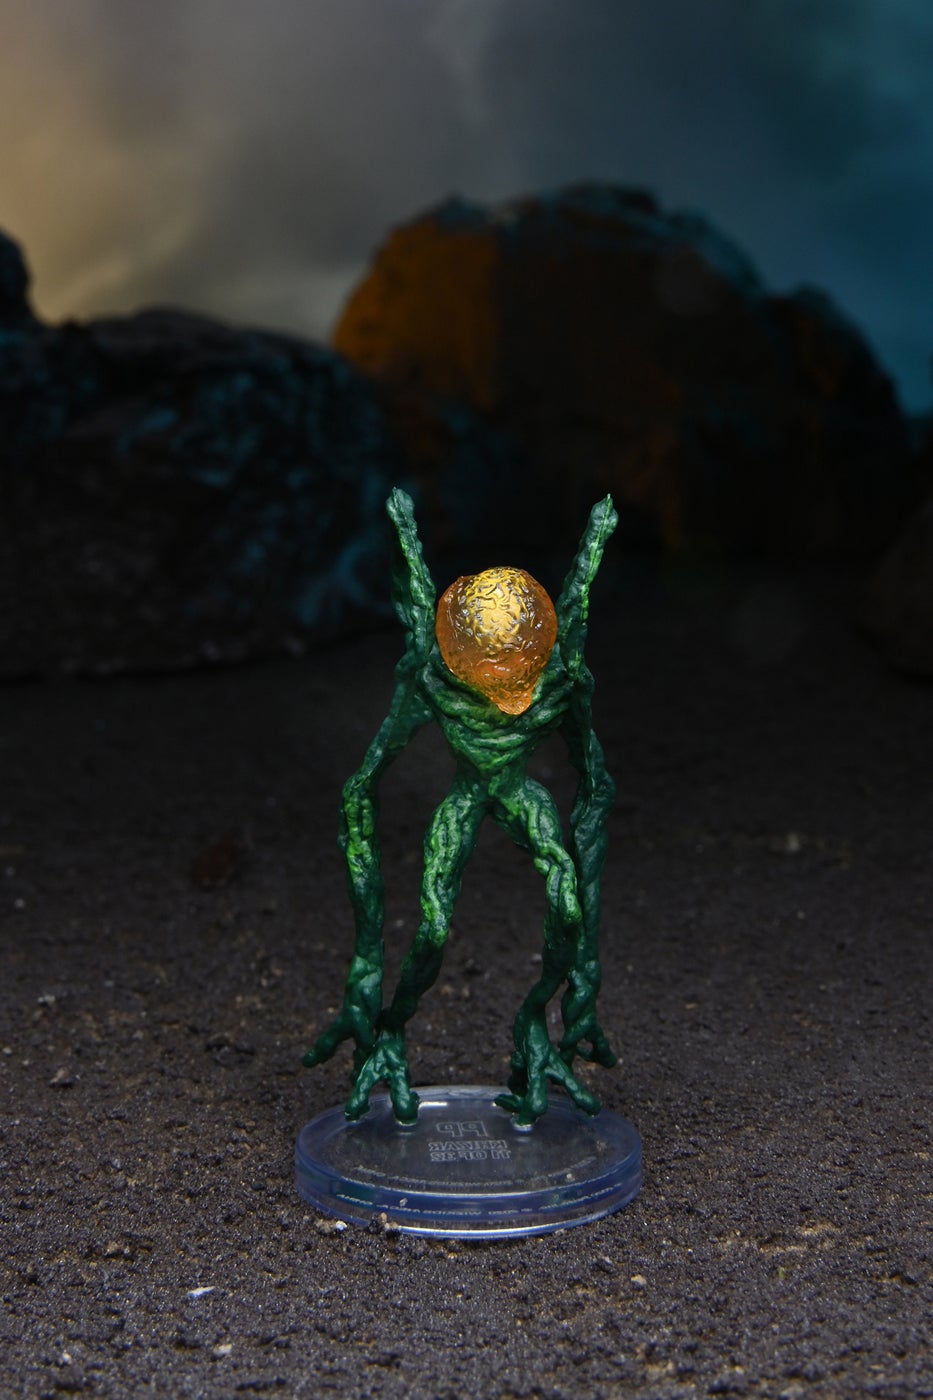 Mini figure of a Khizar, a two legged plant-like alien with a large yellow head